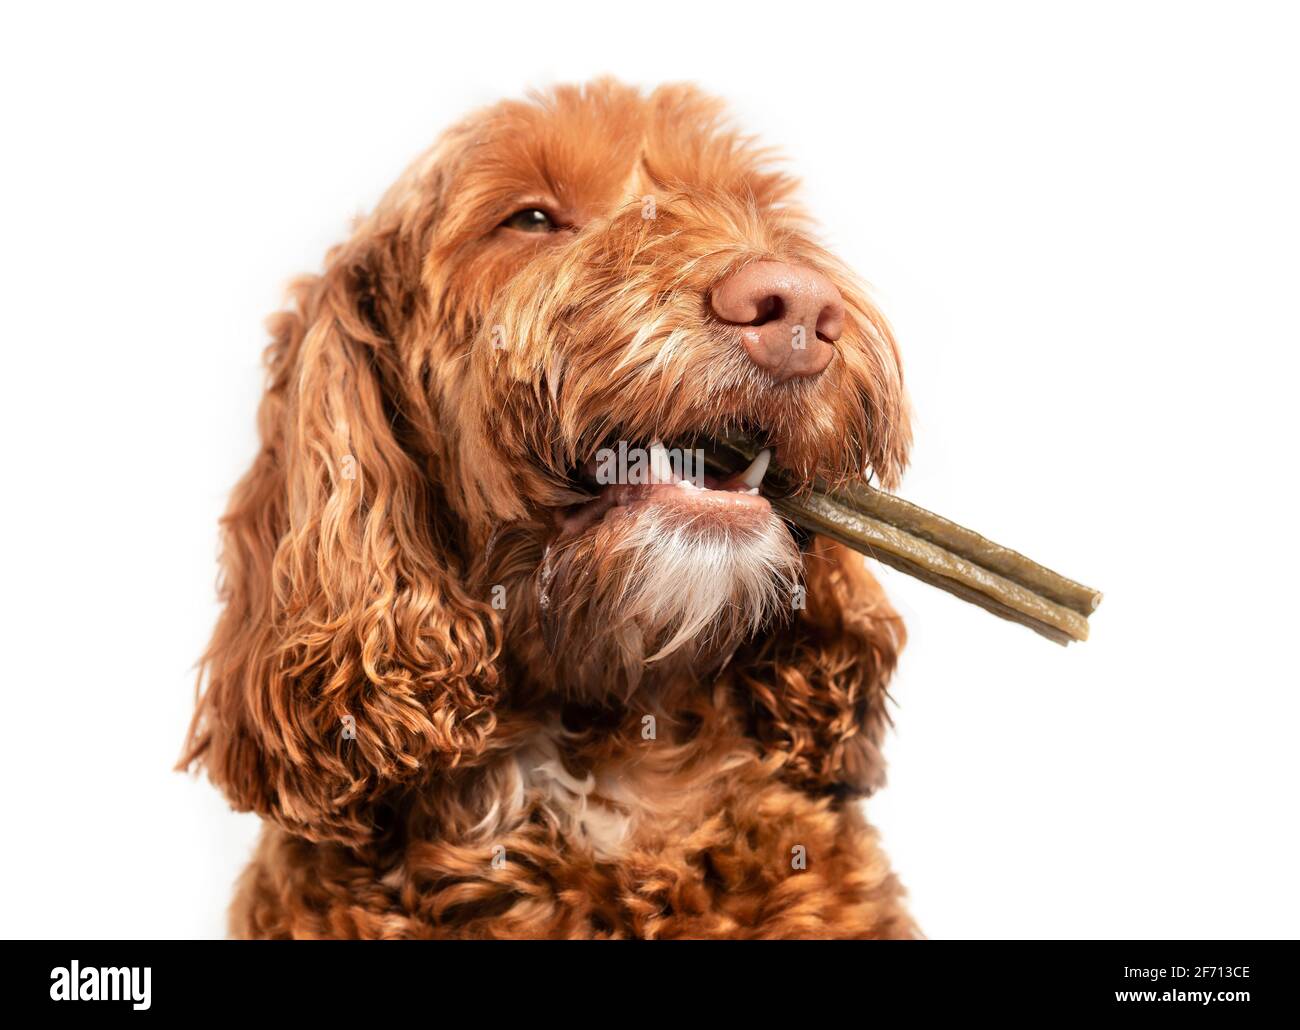 Dog with dental chew bone in mouth. Happy  Labradoodle dog with long stick to the side, like a cigarette. White teeth and fangs visible. Concept for d Stock Photo